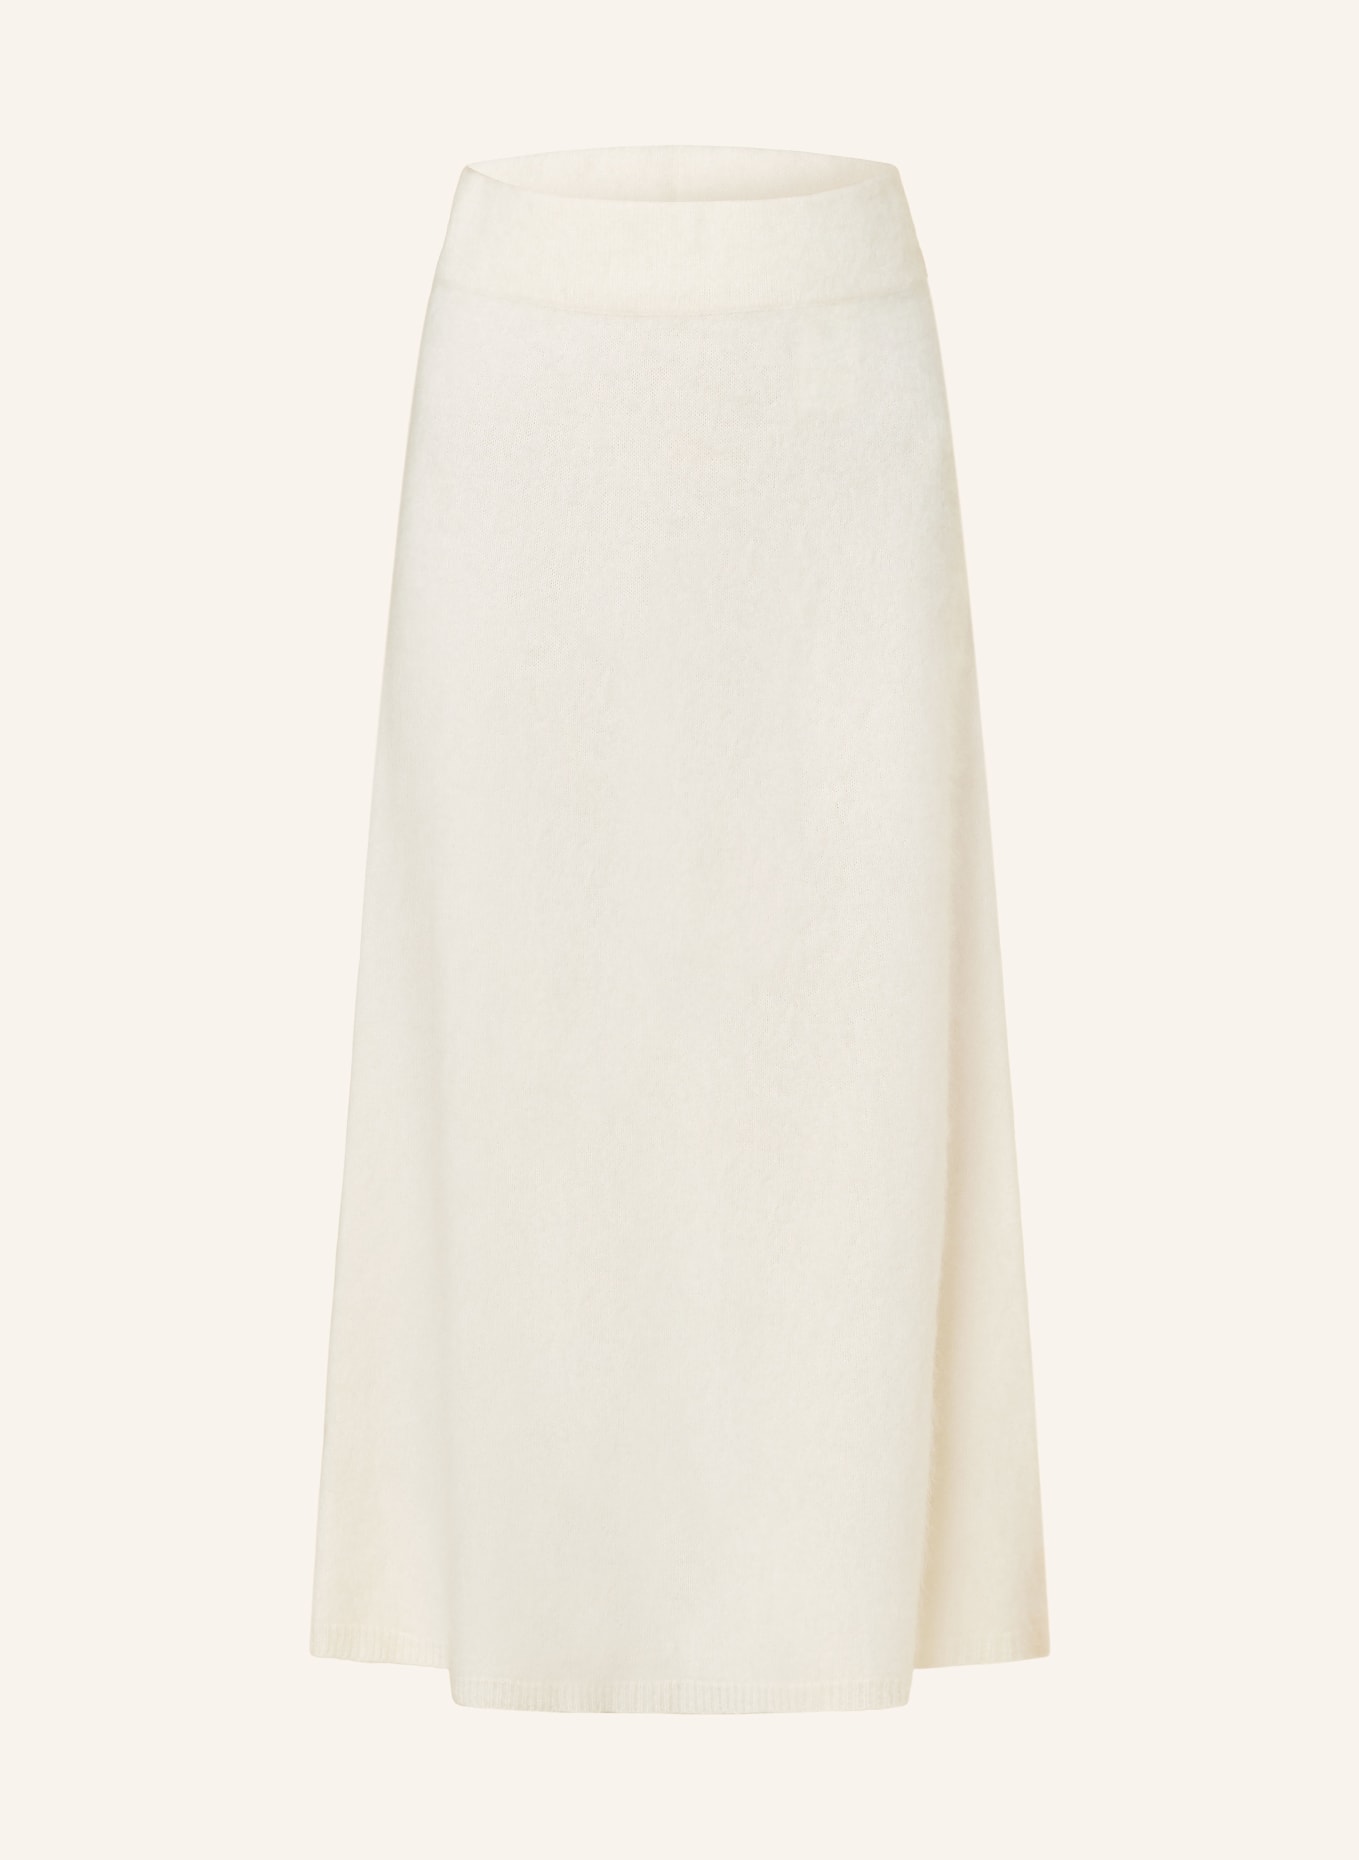 LISA YANG Knit skirt in cashmere, Color: CREAM (Image 1)